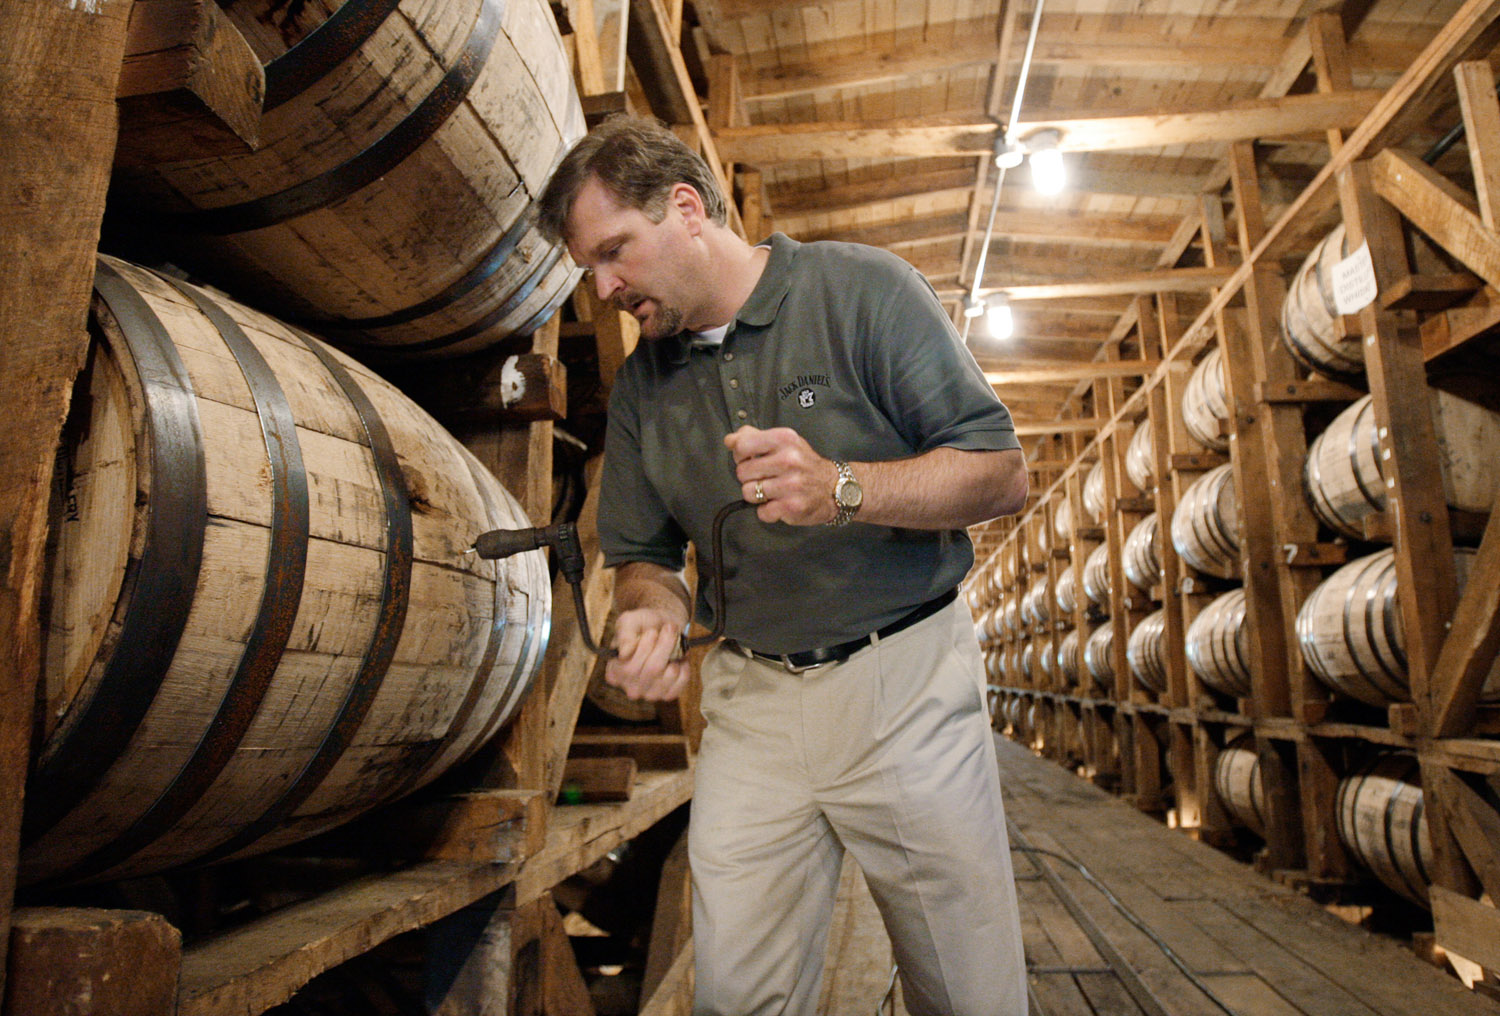 Jeff Arnett, the master distiller at the Jack Daniel Distillery in Lynchburg, Tenn., drills a hole in a barrel of whiskey in one of the aging houses at the distillery, May 20, 2009.